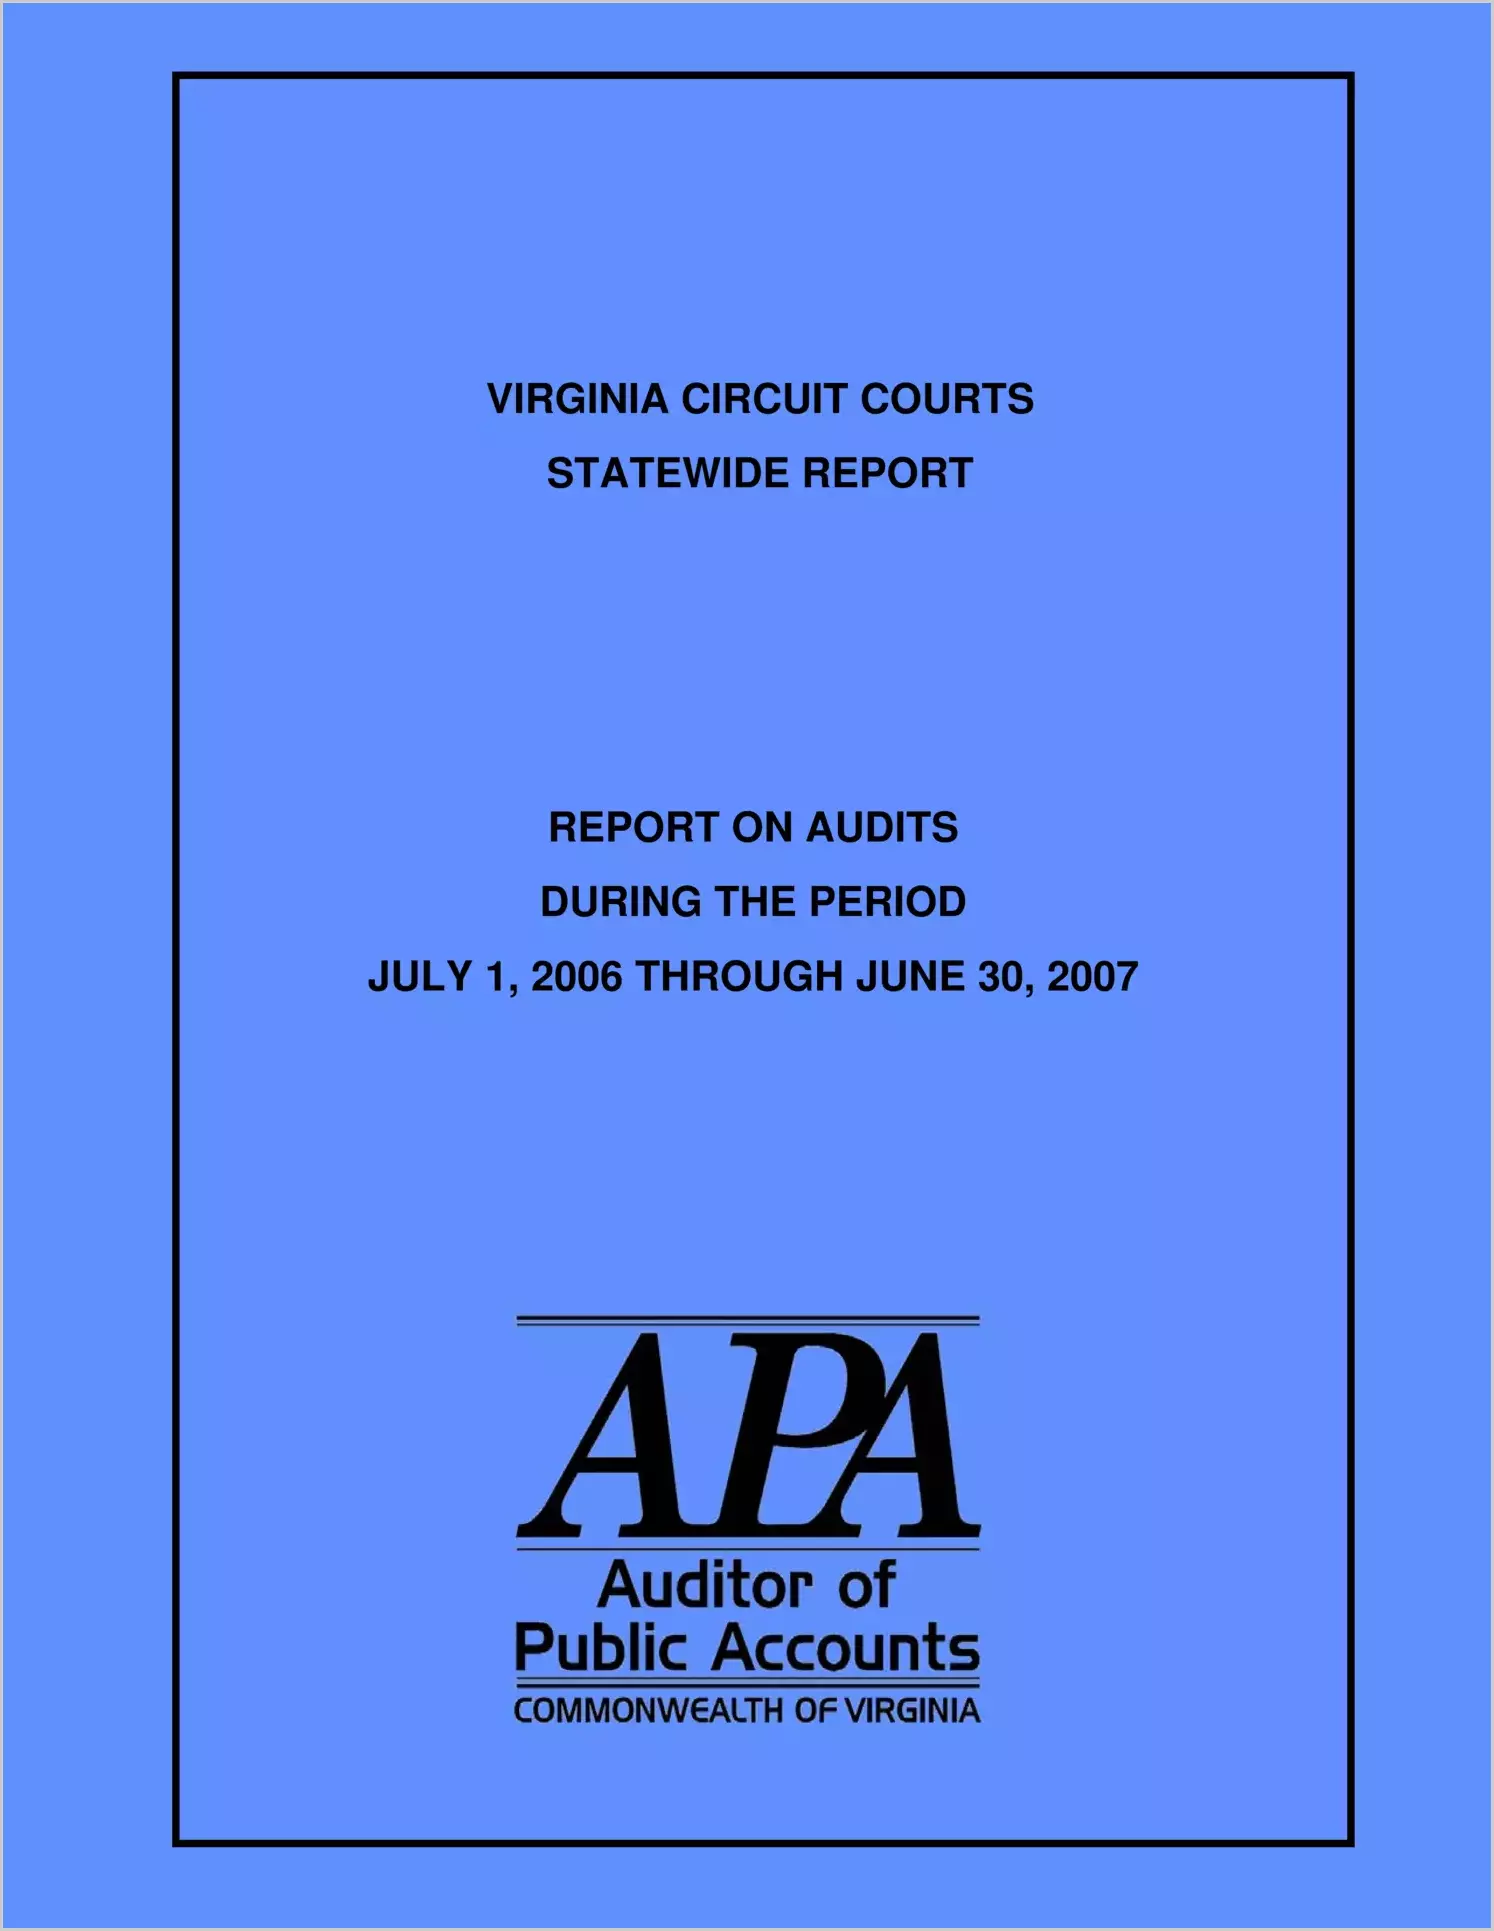 Virginia Circuit Courts Statewide Report Report on Audits during the period July 1, 2006 through June 30, 2007